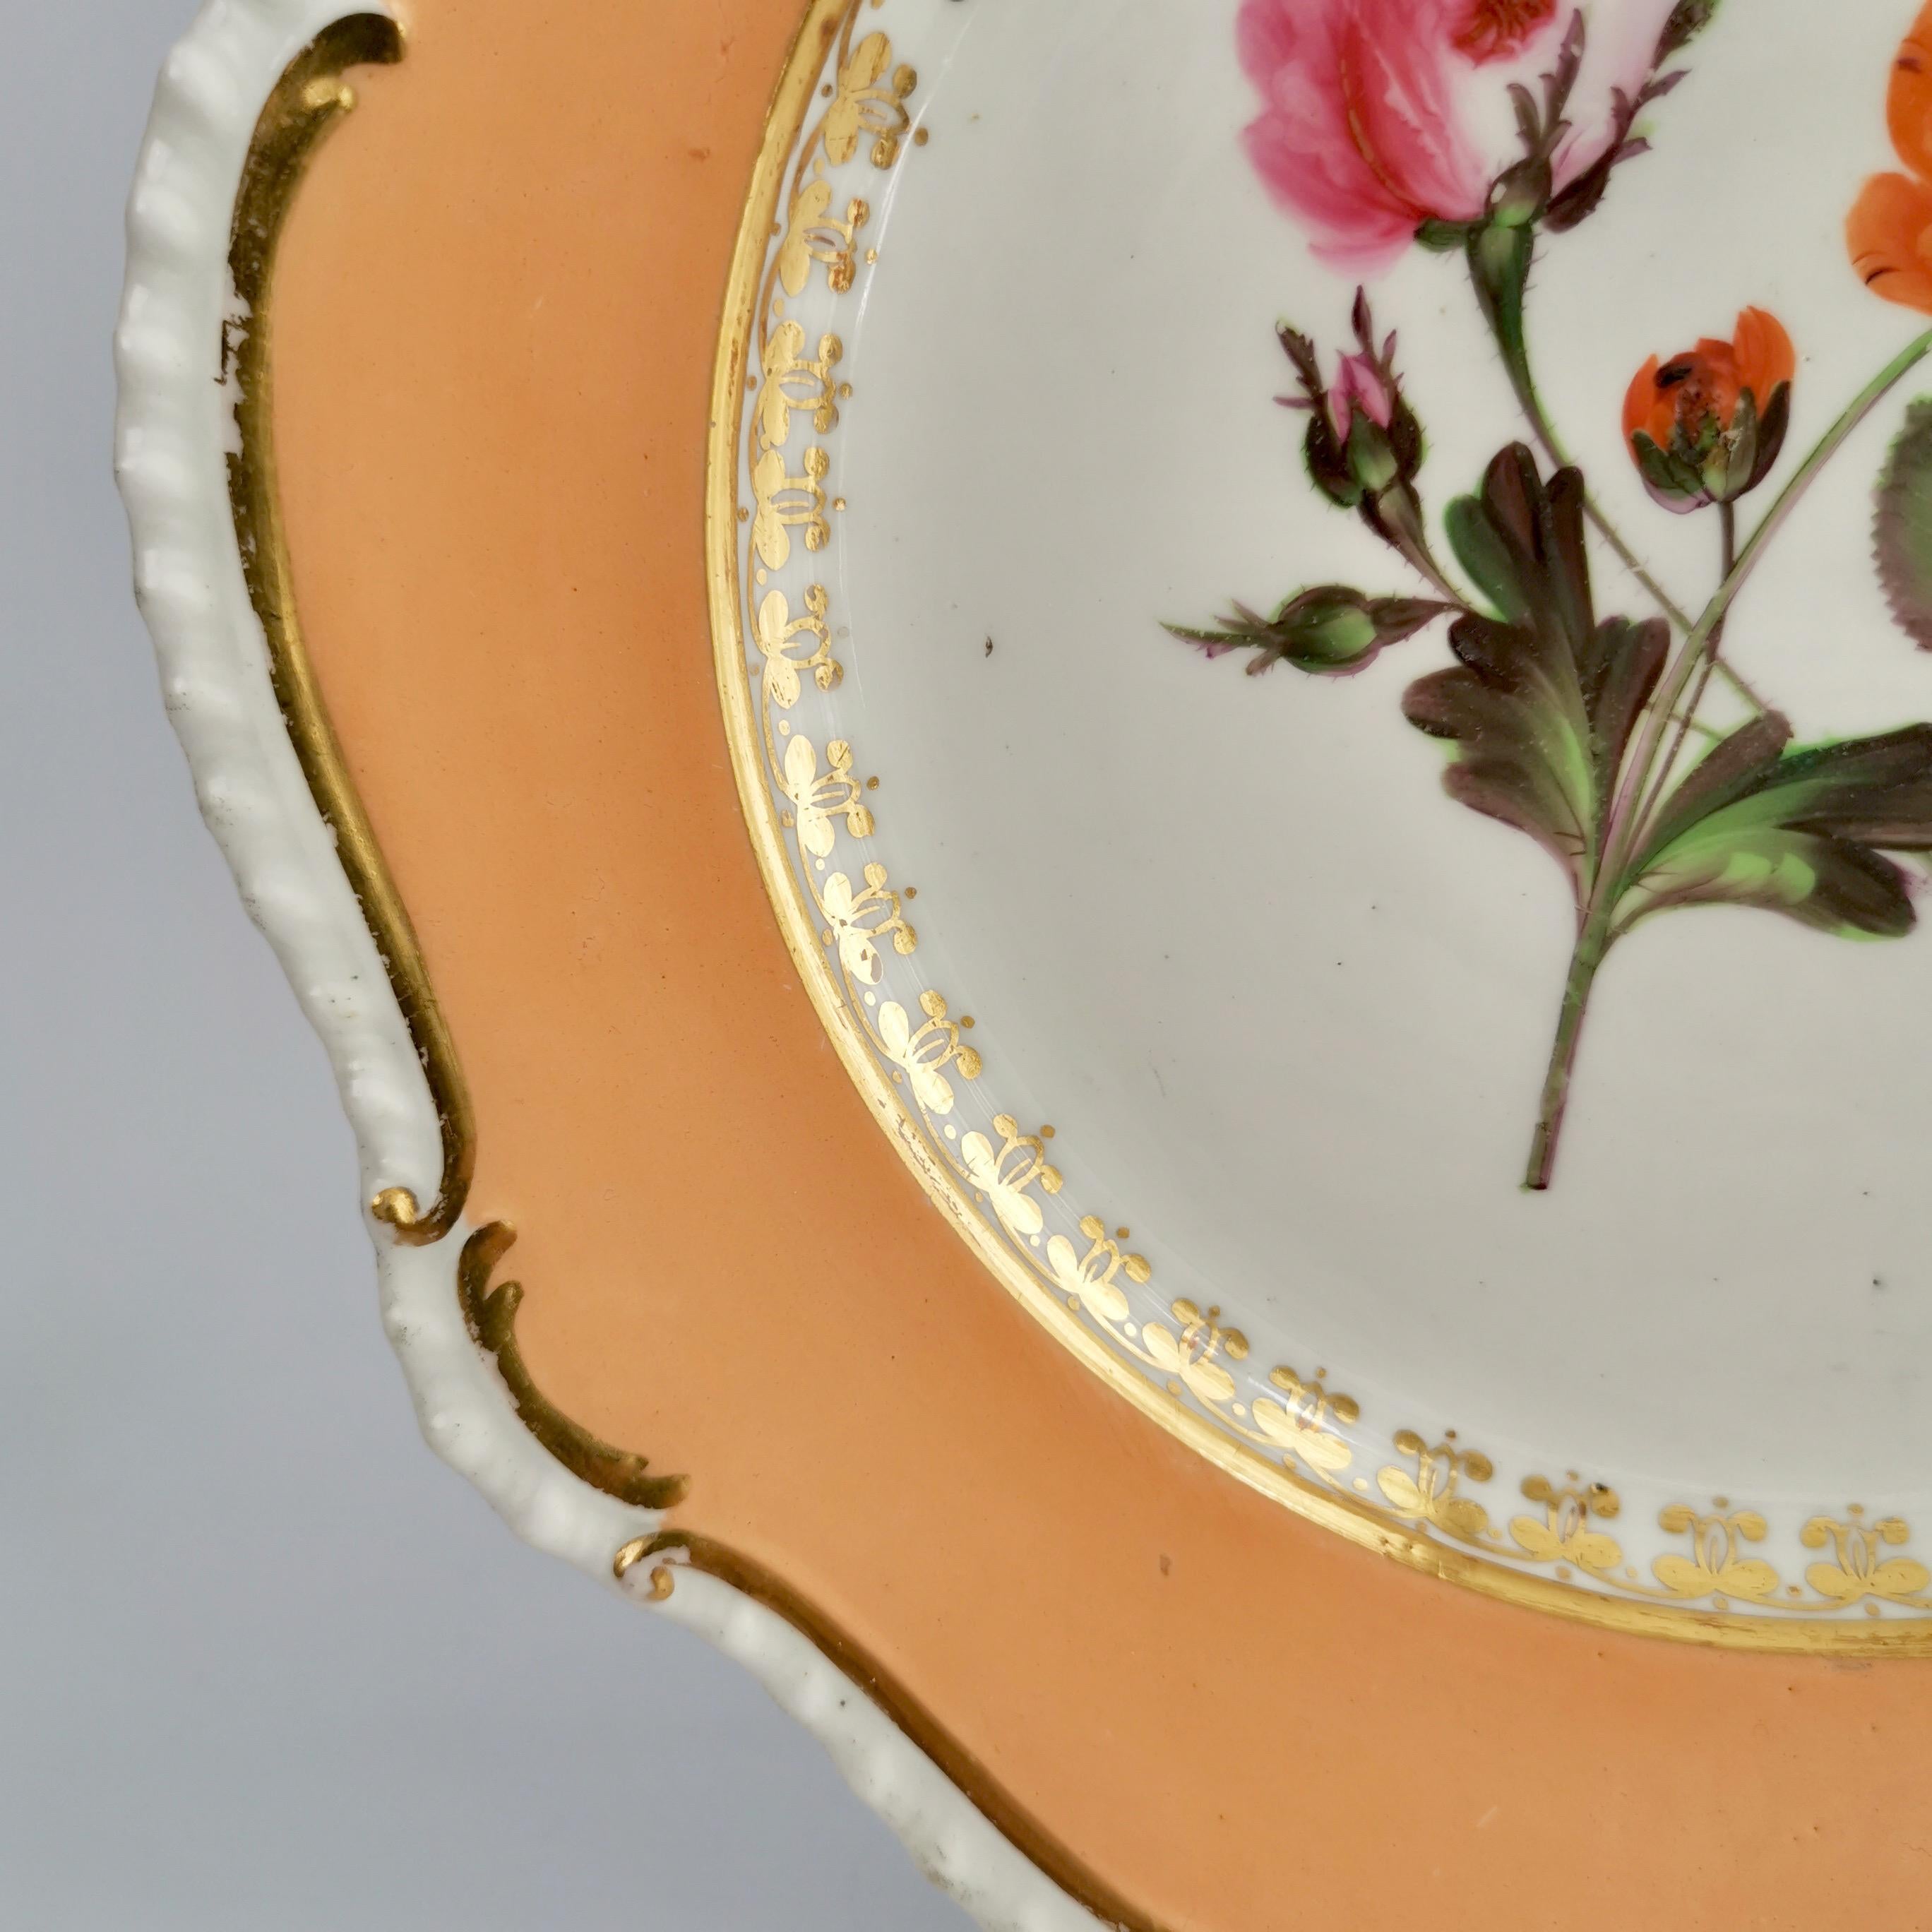 Early 19th Century Coalport Porcelain Plate, Peach with Flowers, Regency, 1820-1825